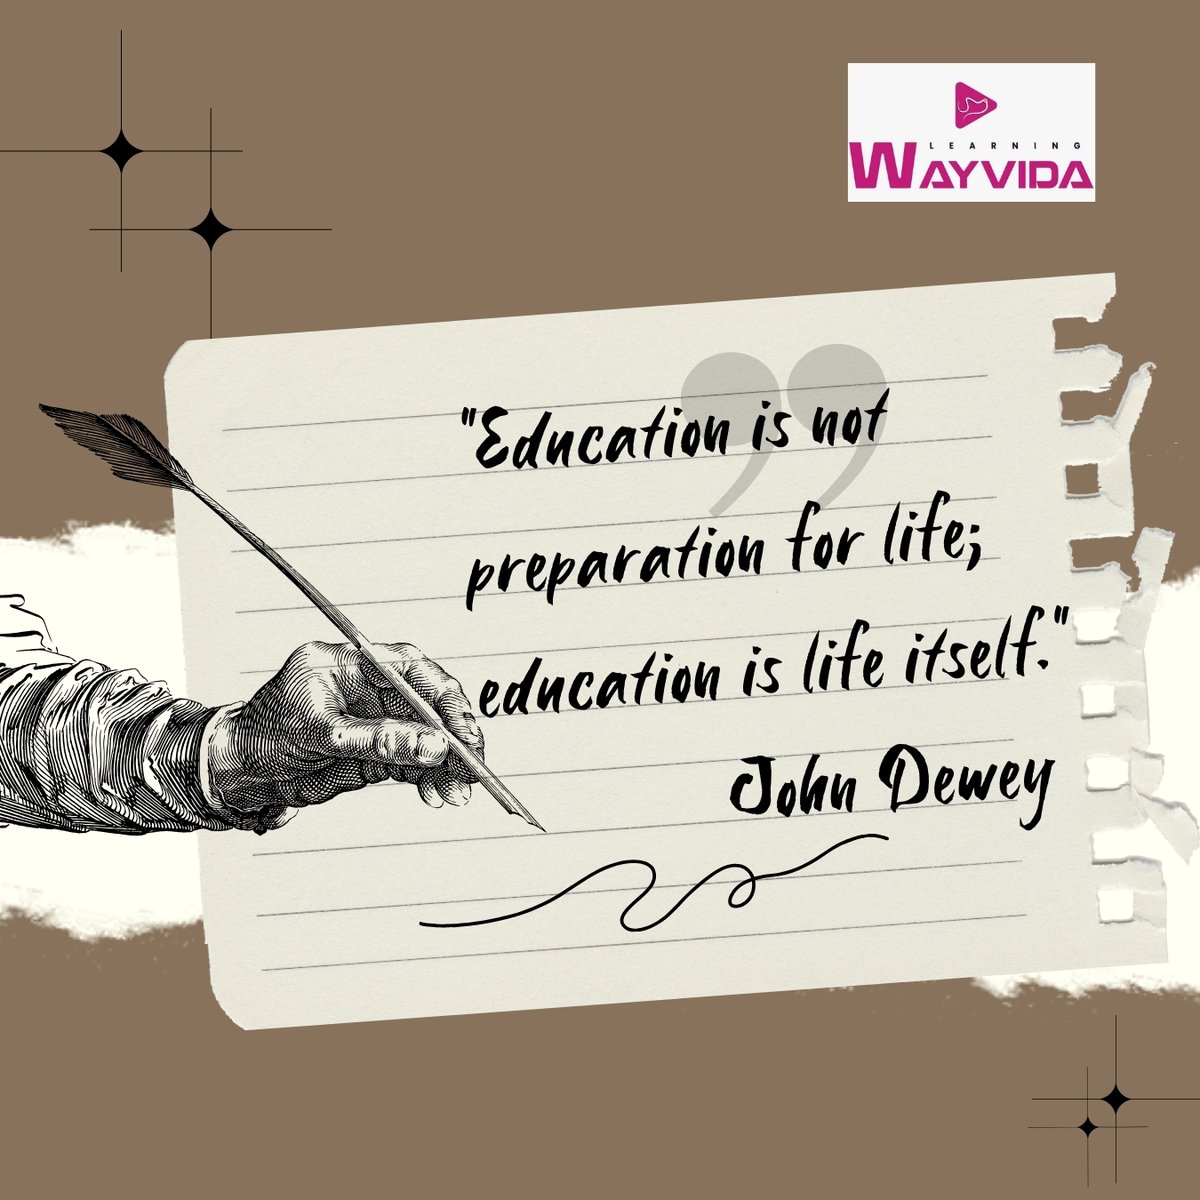 Education is lifelong!

𝐉𝐨𝐡𝐧 𝐃𝐞𝐰𝐞𝐲 said it best: '𝐄𝐝𝐮𝐜𝐚𝐭𝐢𝐨𝐧 𝐢𝐬 𝐧𝐨𝐭 𝐩𝐫𝐞𝐩𝐚𝐫𝐚𝐭𝐢𝐨𝐧 𝐟𝐨𝐫 𝐥𝐢𝐟𝐞; 𝐞𝐝𝐮𝐜𝐚𝐭𝐢𝐨𝐧 𝐢𝐬 𝐥𝐢𝐟𝐞 𝐢𝐭𝐬𝐞𝐥𝐟.'

What are you learning today that keeps you growing?

#lifelonglearning #educationquotes #JohnDewey